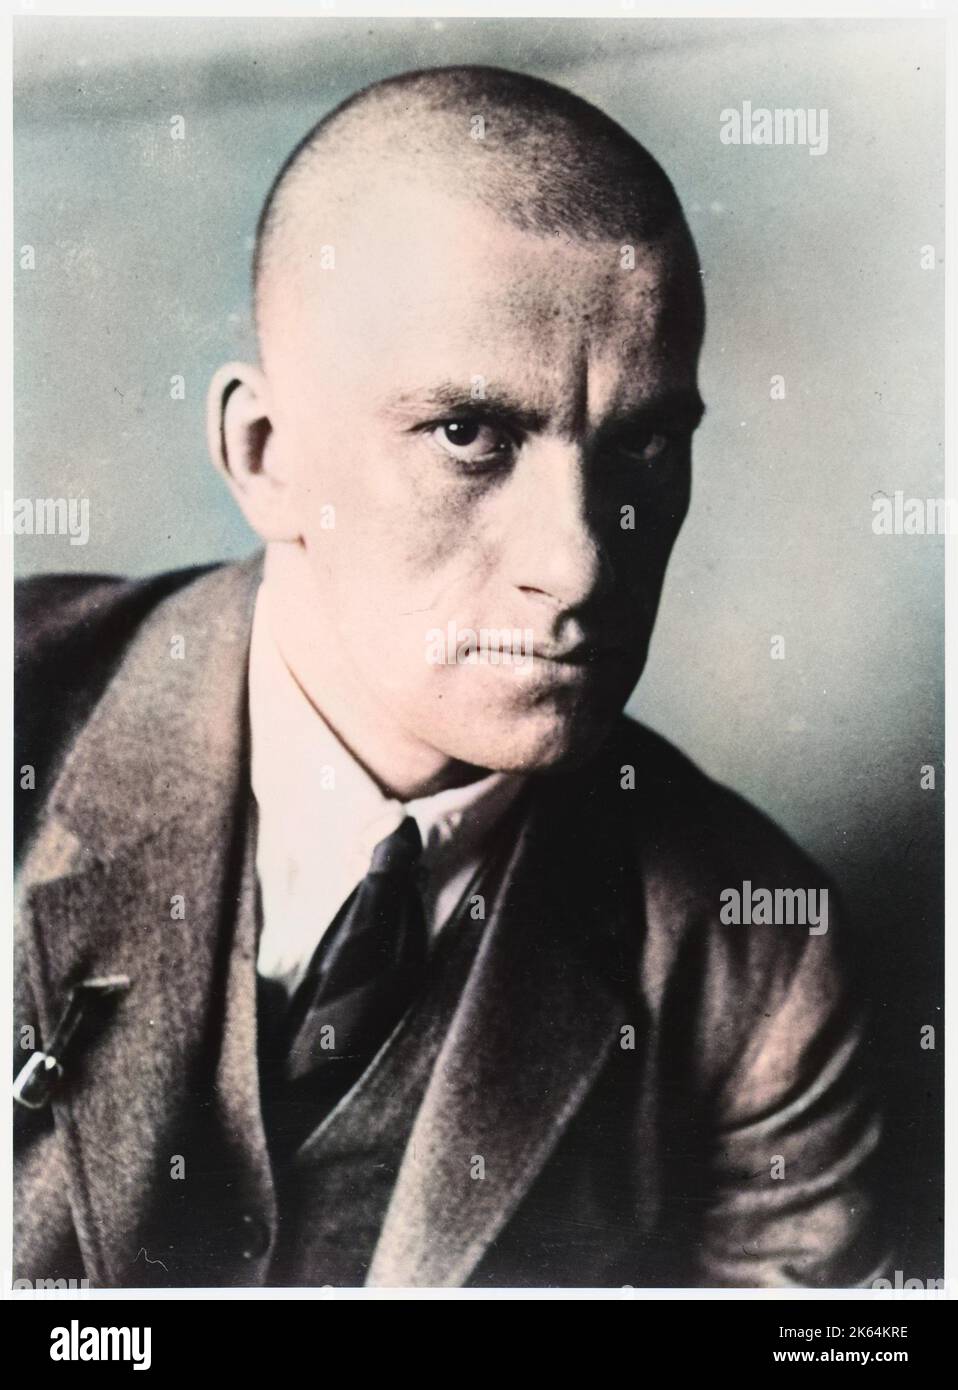 VLADIMIR MAYAKOVSKY - Russian poet and supporter of the Communist party in Russia (this photograph is dated 1927)     Date: 1893 - 1930 Stock Photo